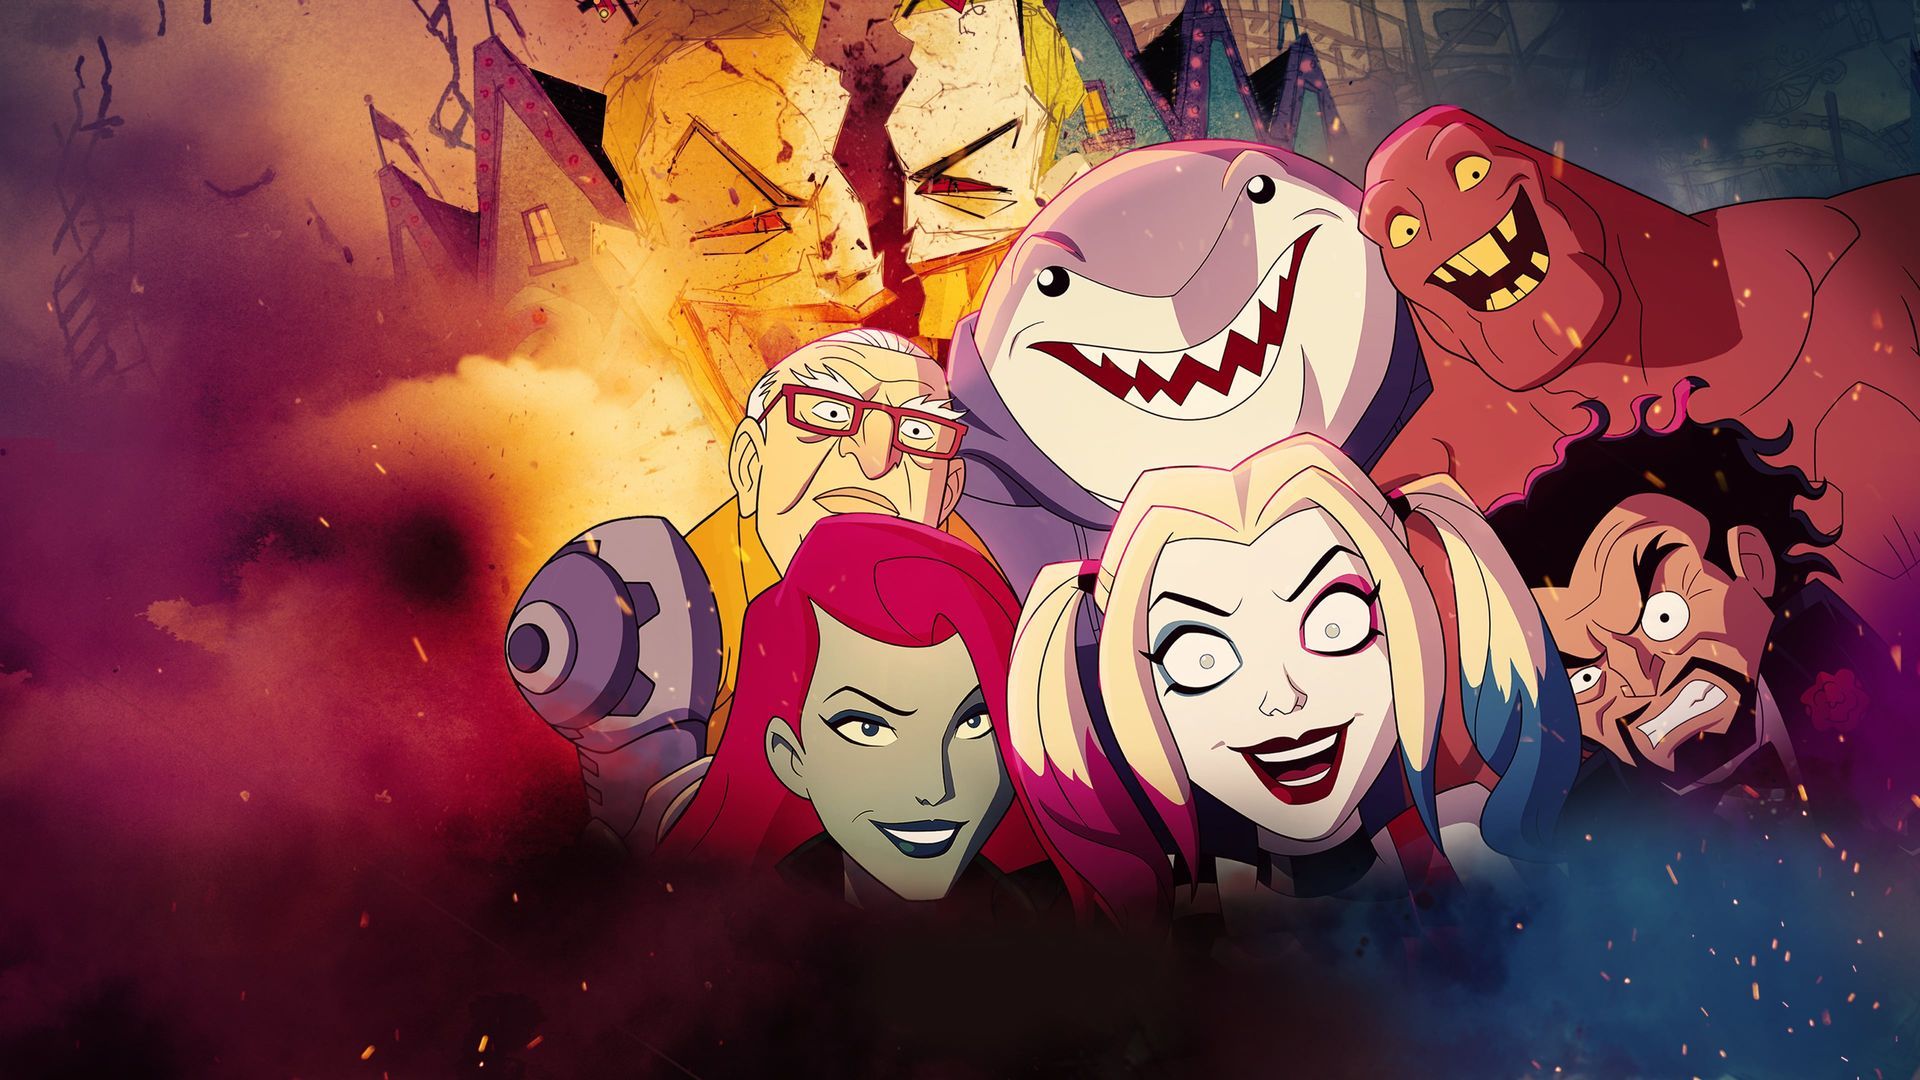 Everything About The New Harley Quinn Series + HD Wallpaper!